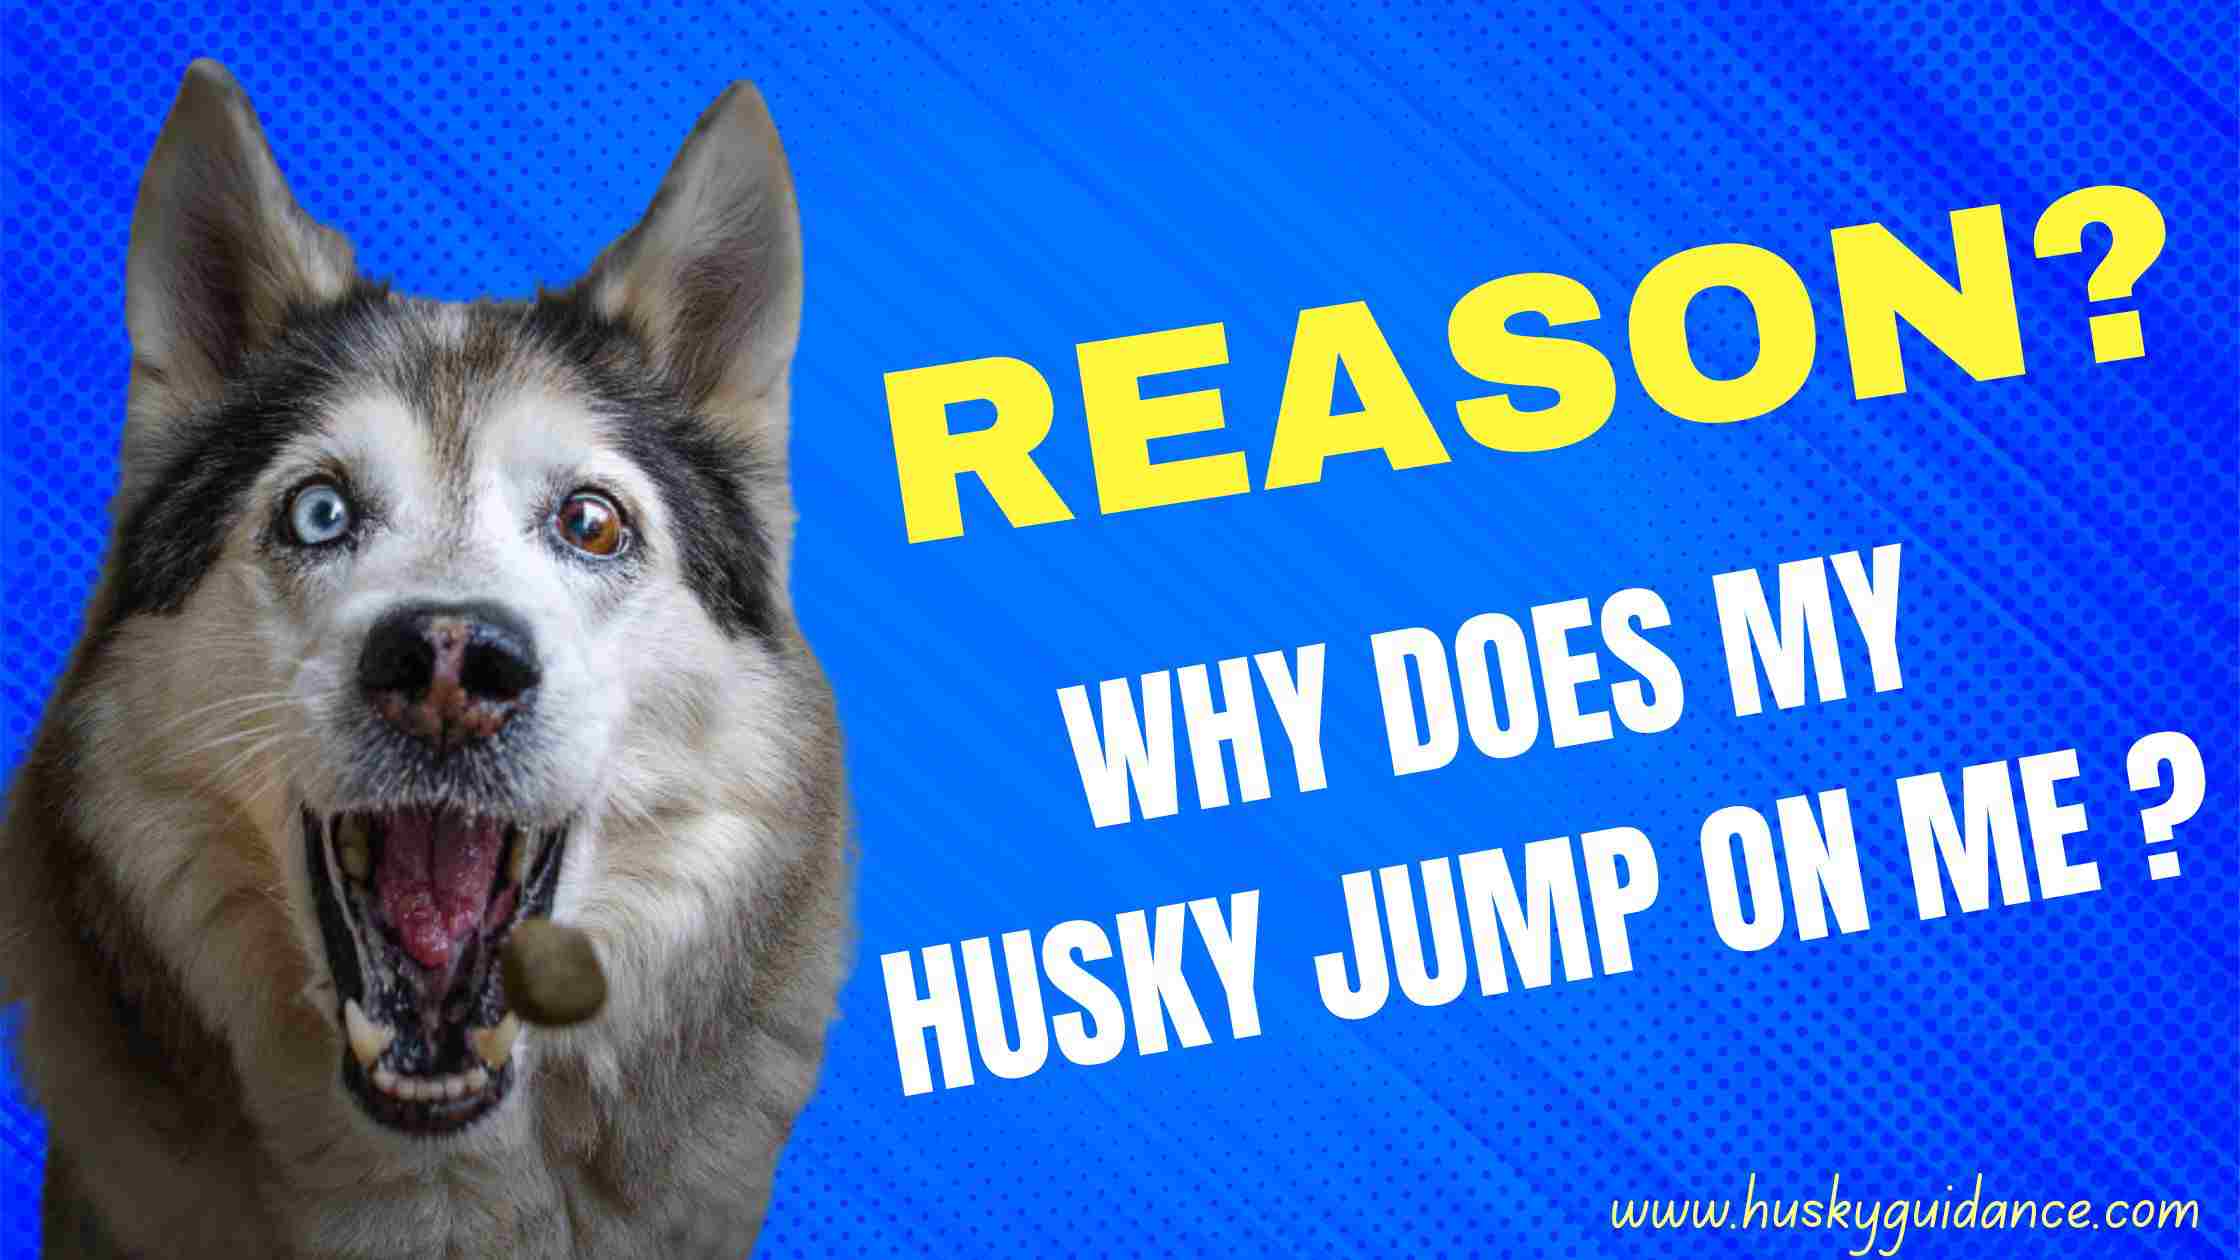 Why does my husky jump on me?